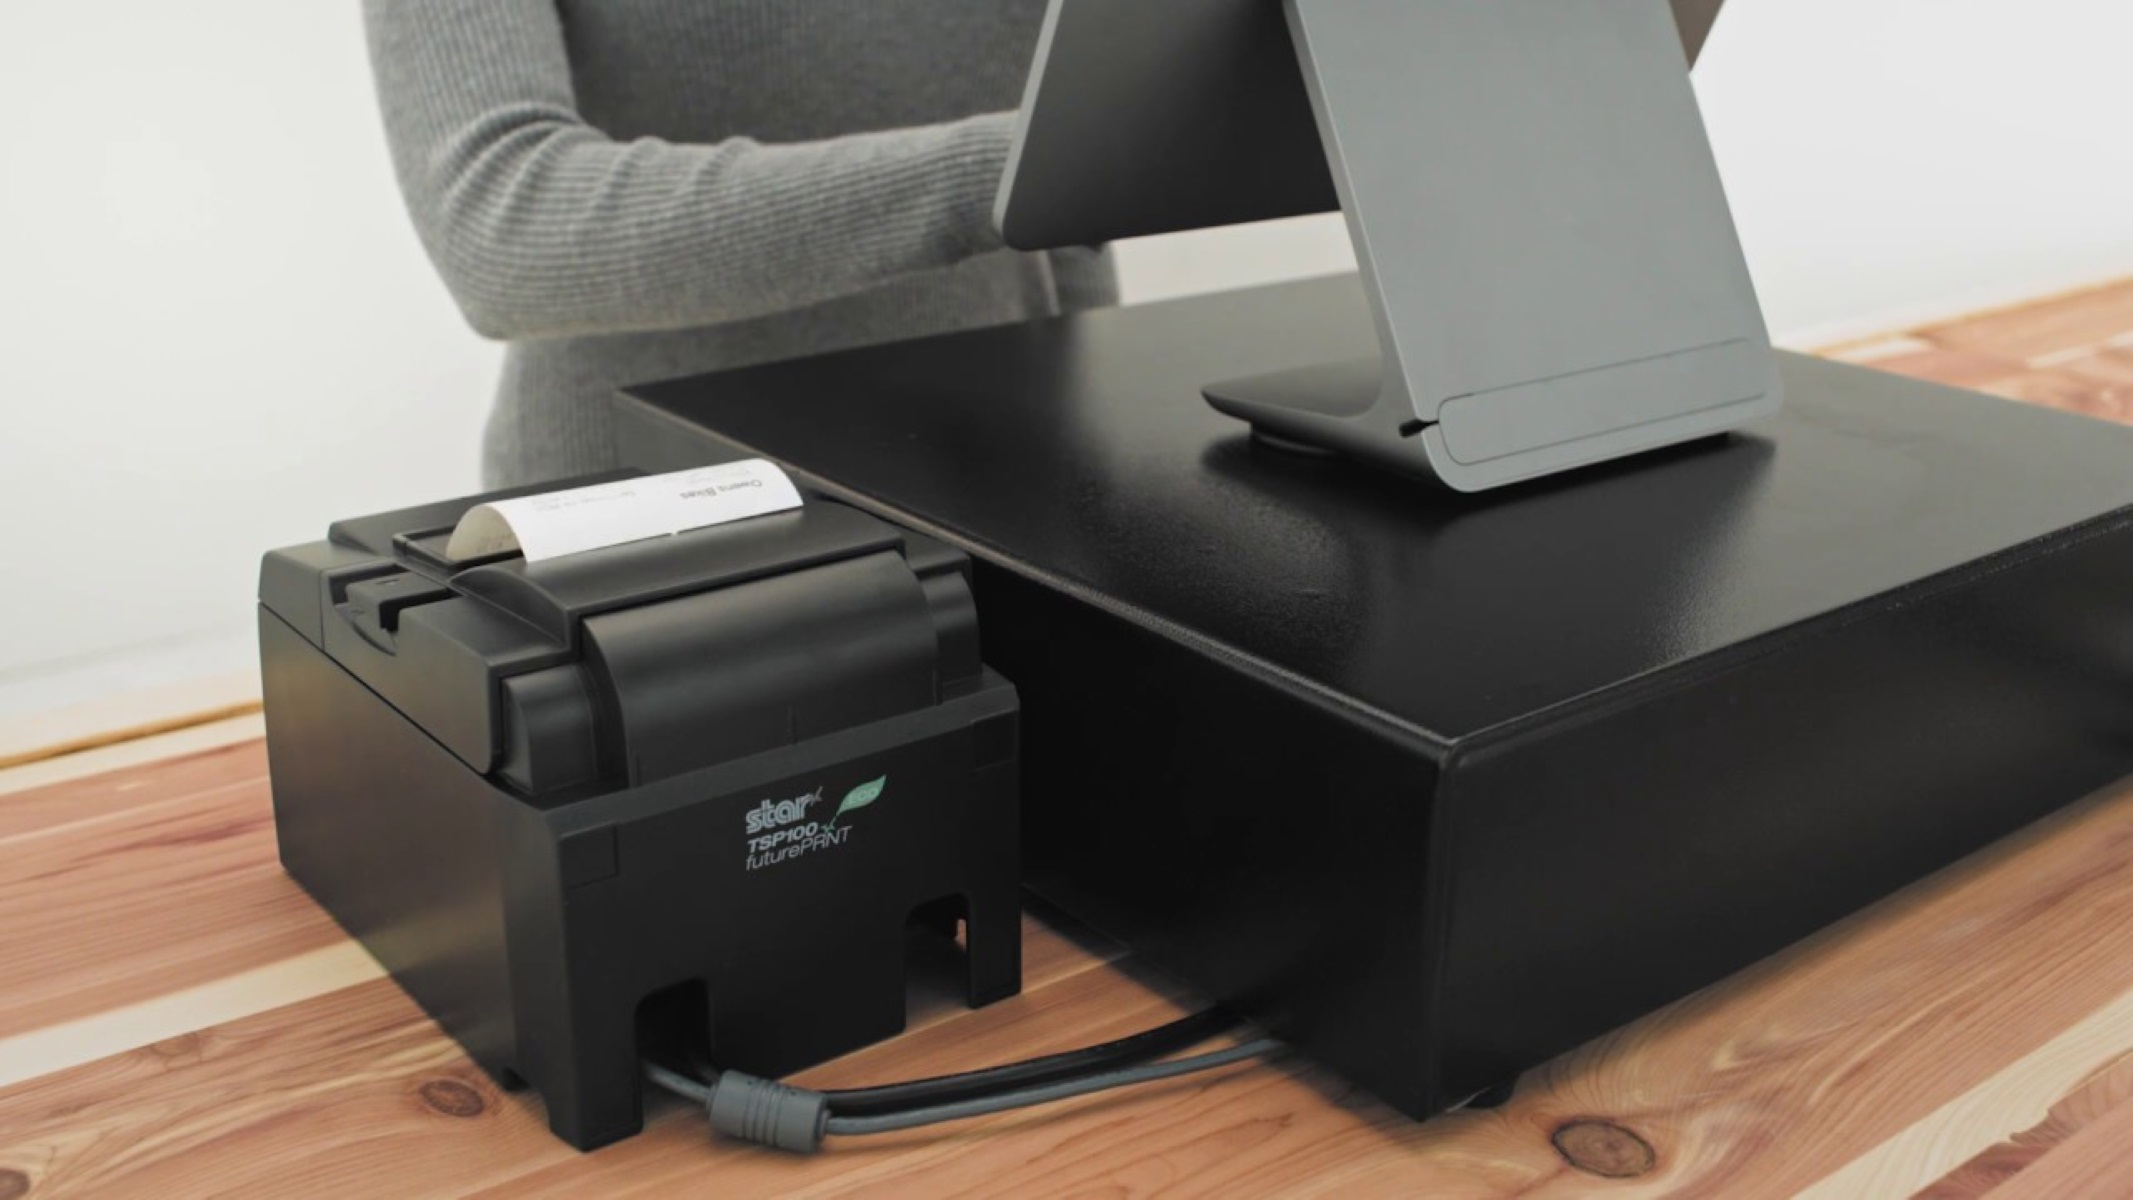 How To Connect Printer To Square Register